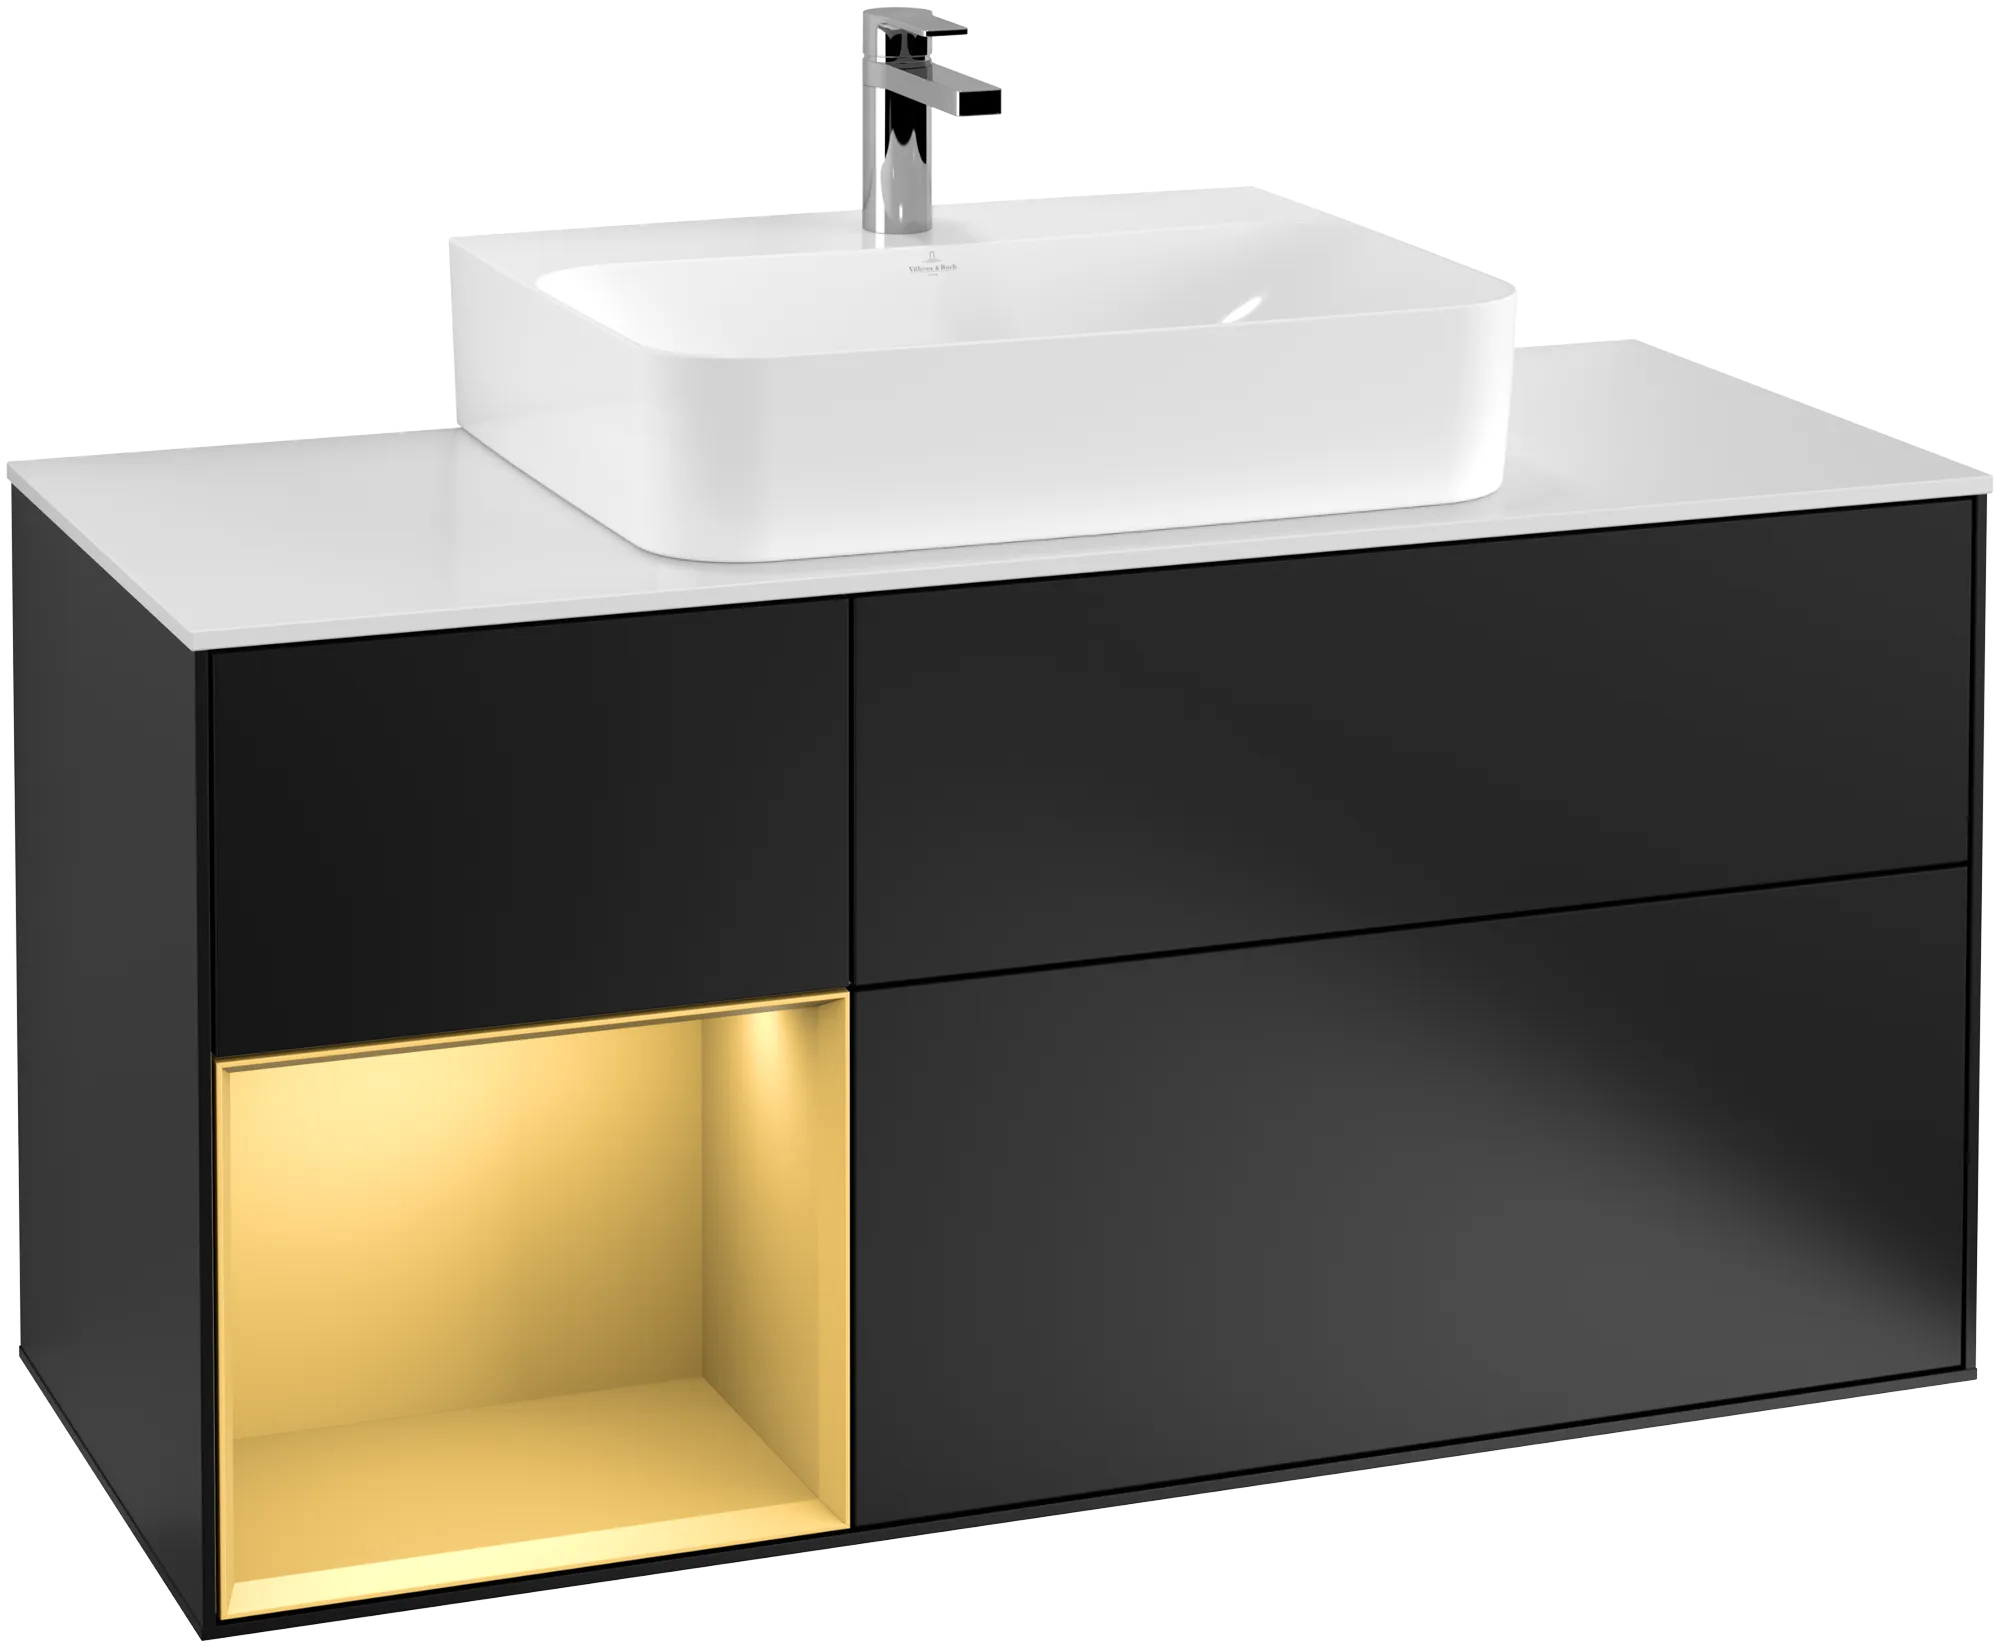 Picture of VILLEROY BOCH Finion Vanity unit, with lighting, 3 pull-out compartments, 1200 x 603 x 501 mm, Black Matt Lacquer / Gold Matt Lacquer / Glass White Matt #G161HFPD